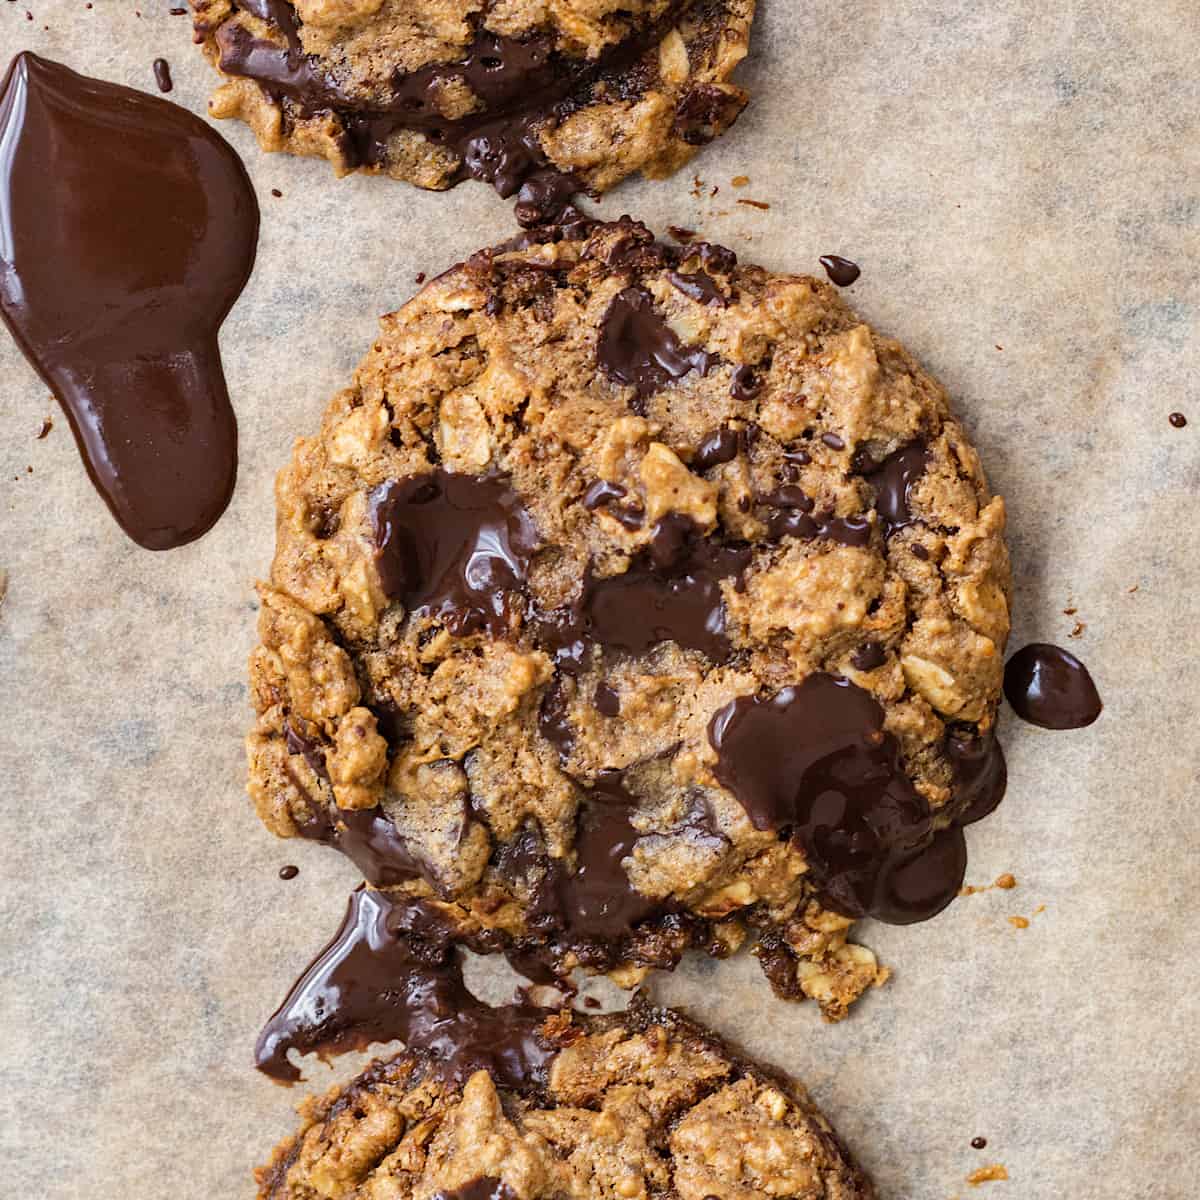 Unique chocolate oatmeal cookies with a delightful chocolate drizzle on a baking sheet.